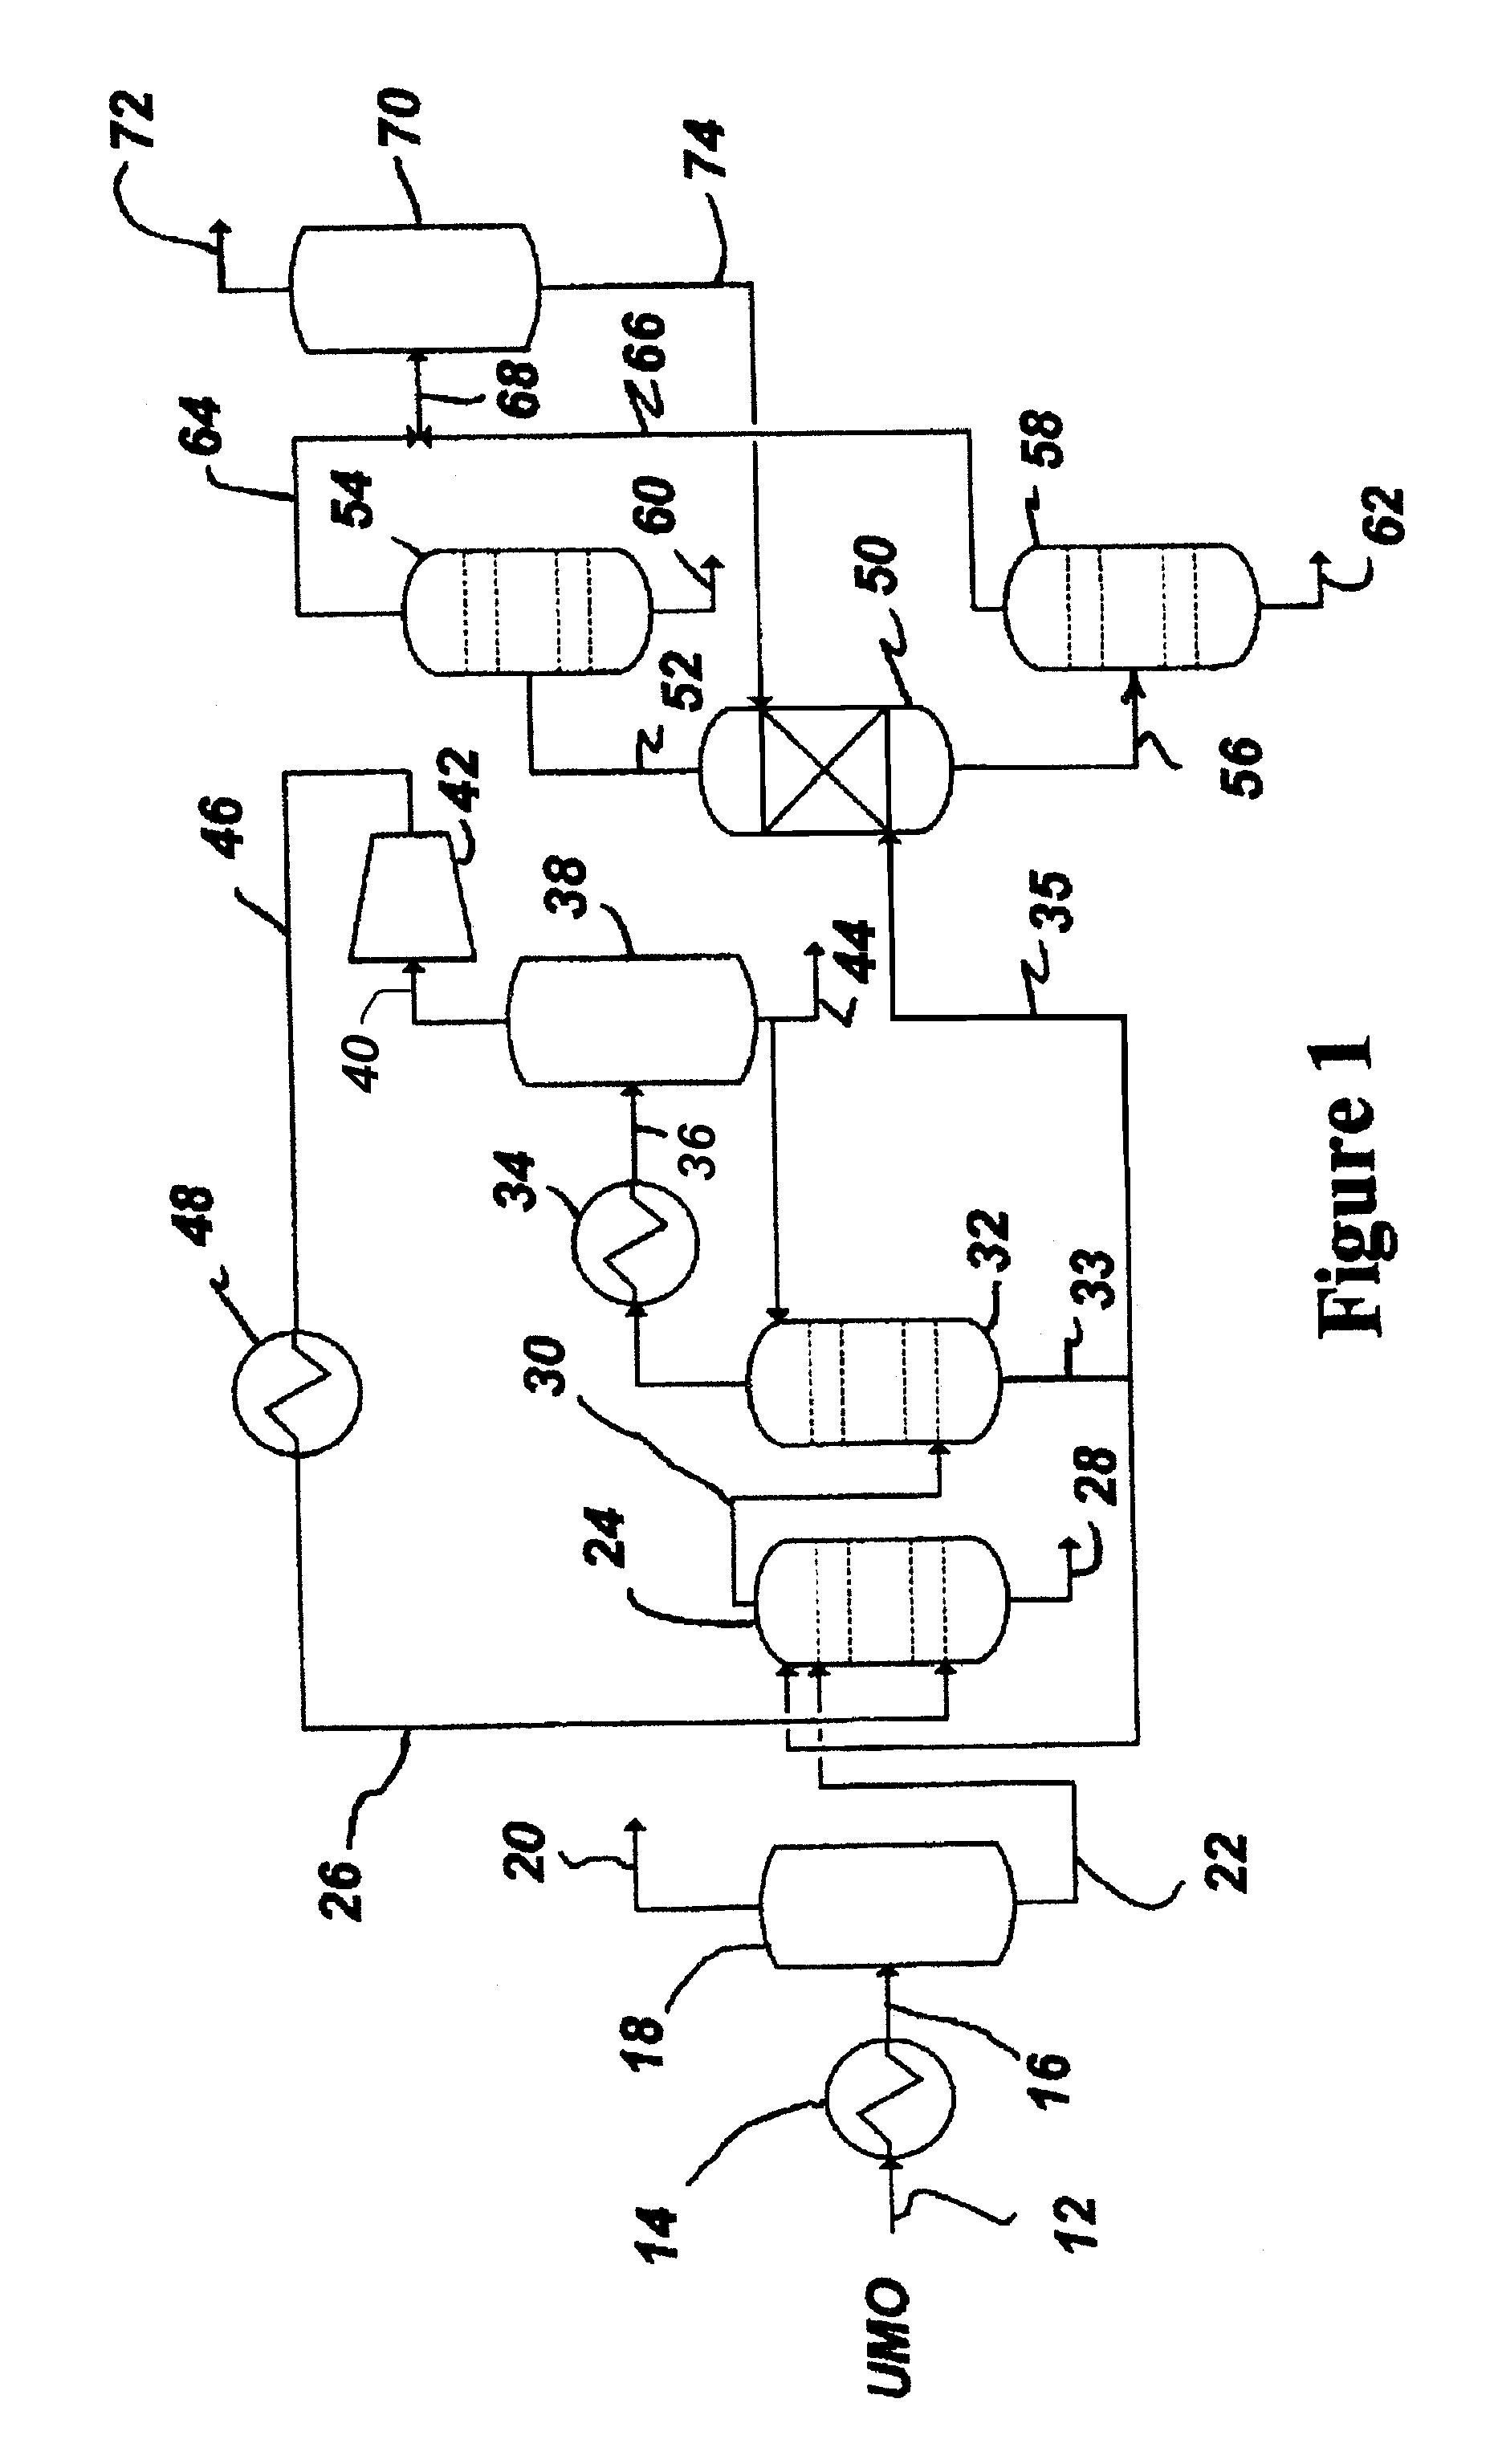 System and Method for Stripping and Extraction of Used Lubricating Oil